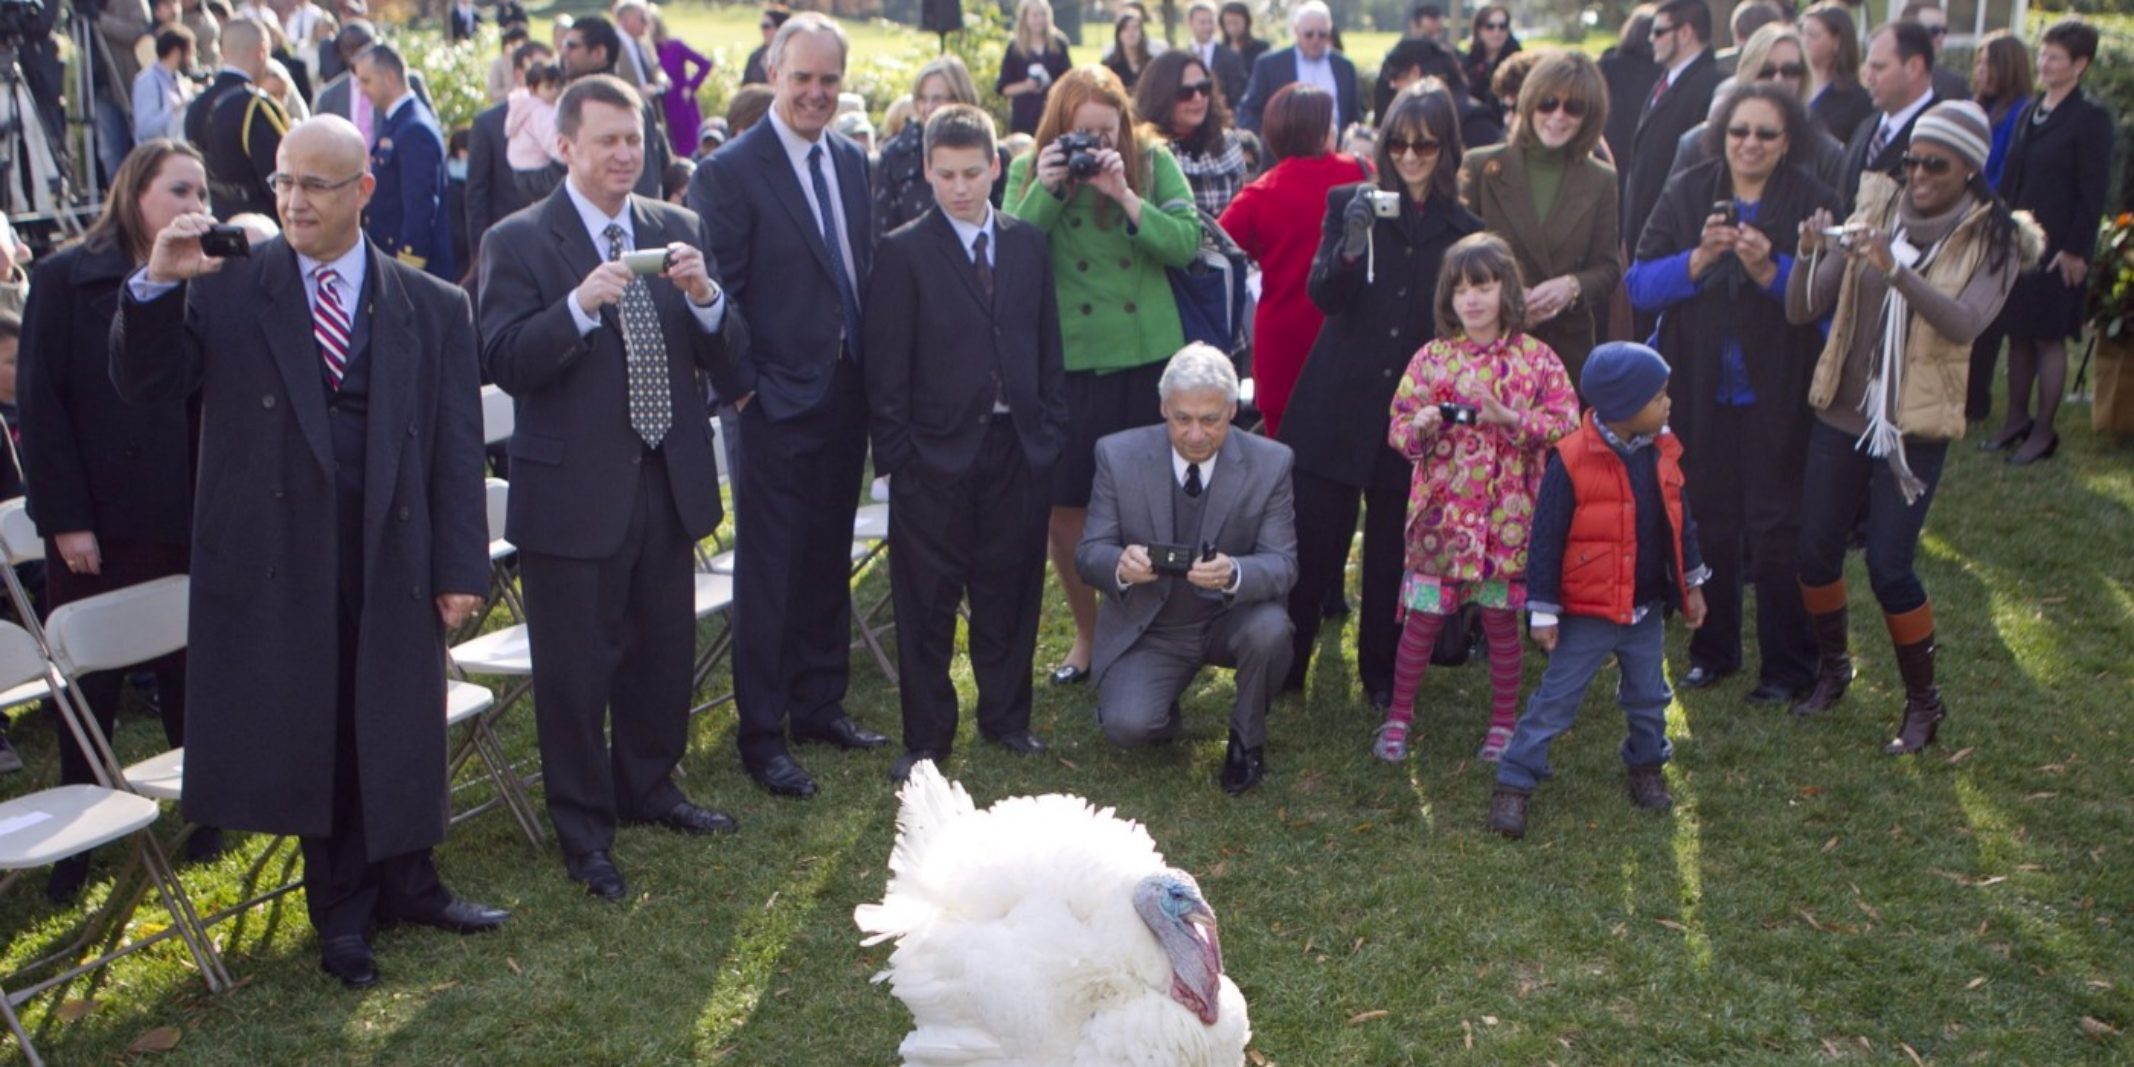 A crowd of smiling families gather around a live turkey, taking photos.